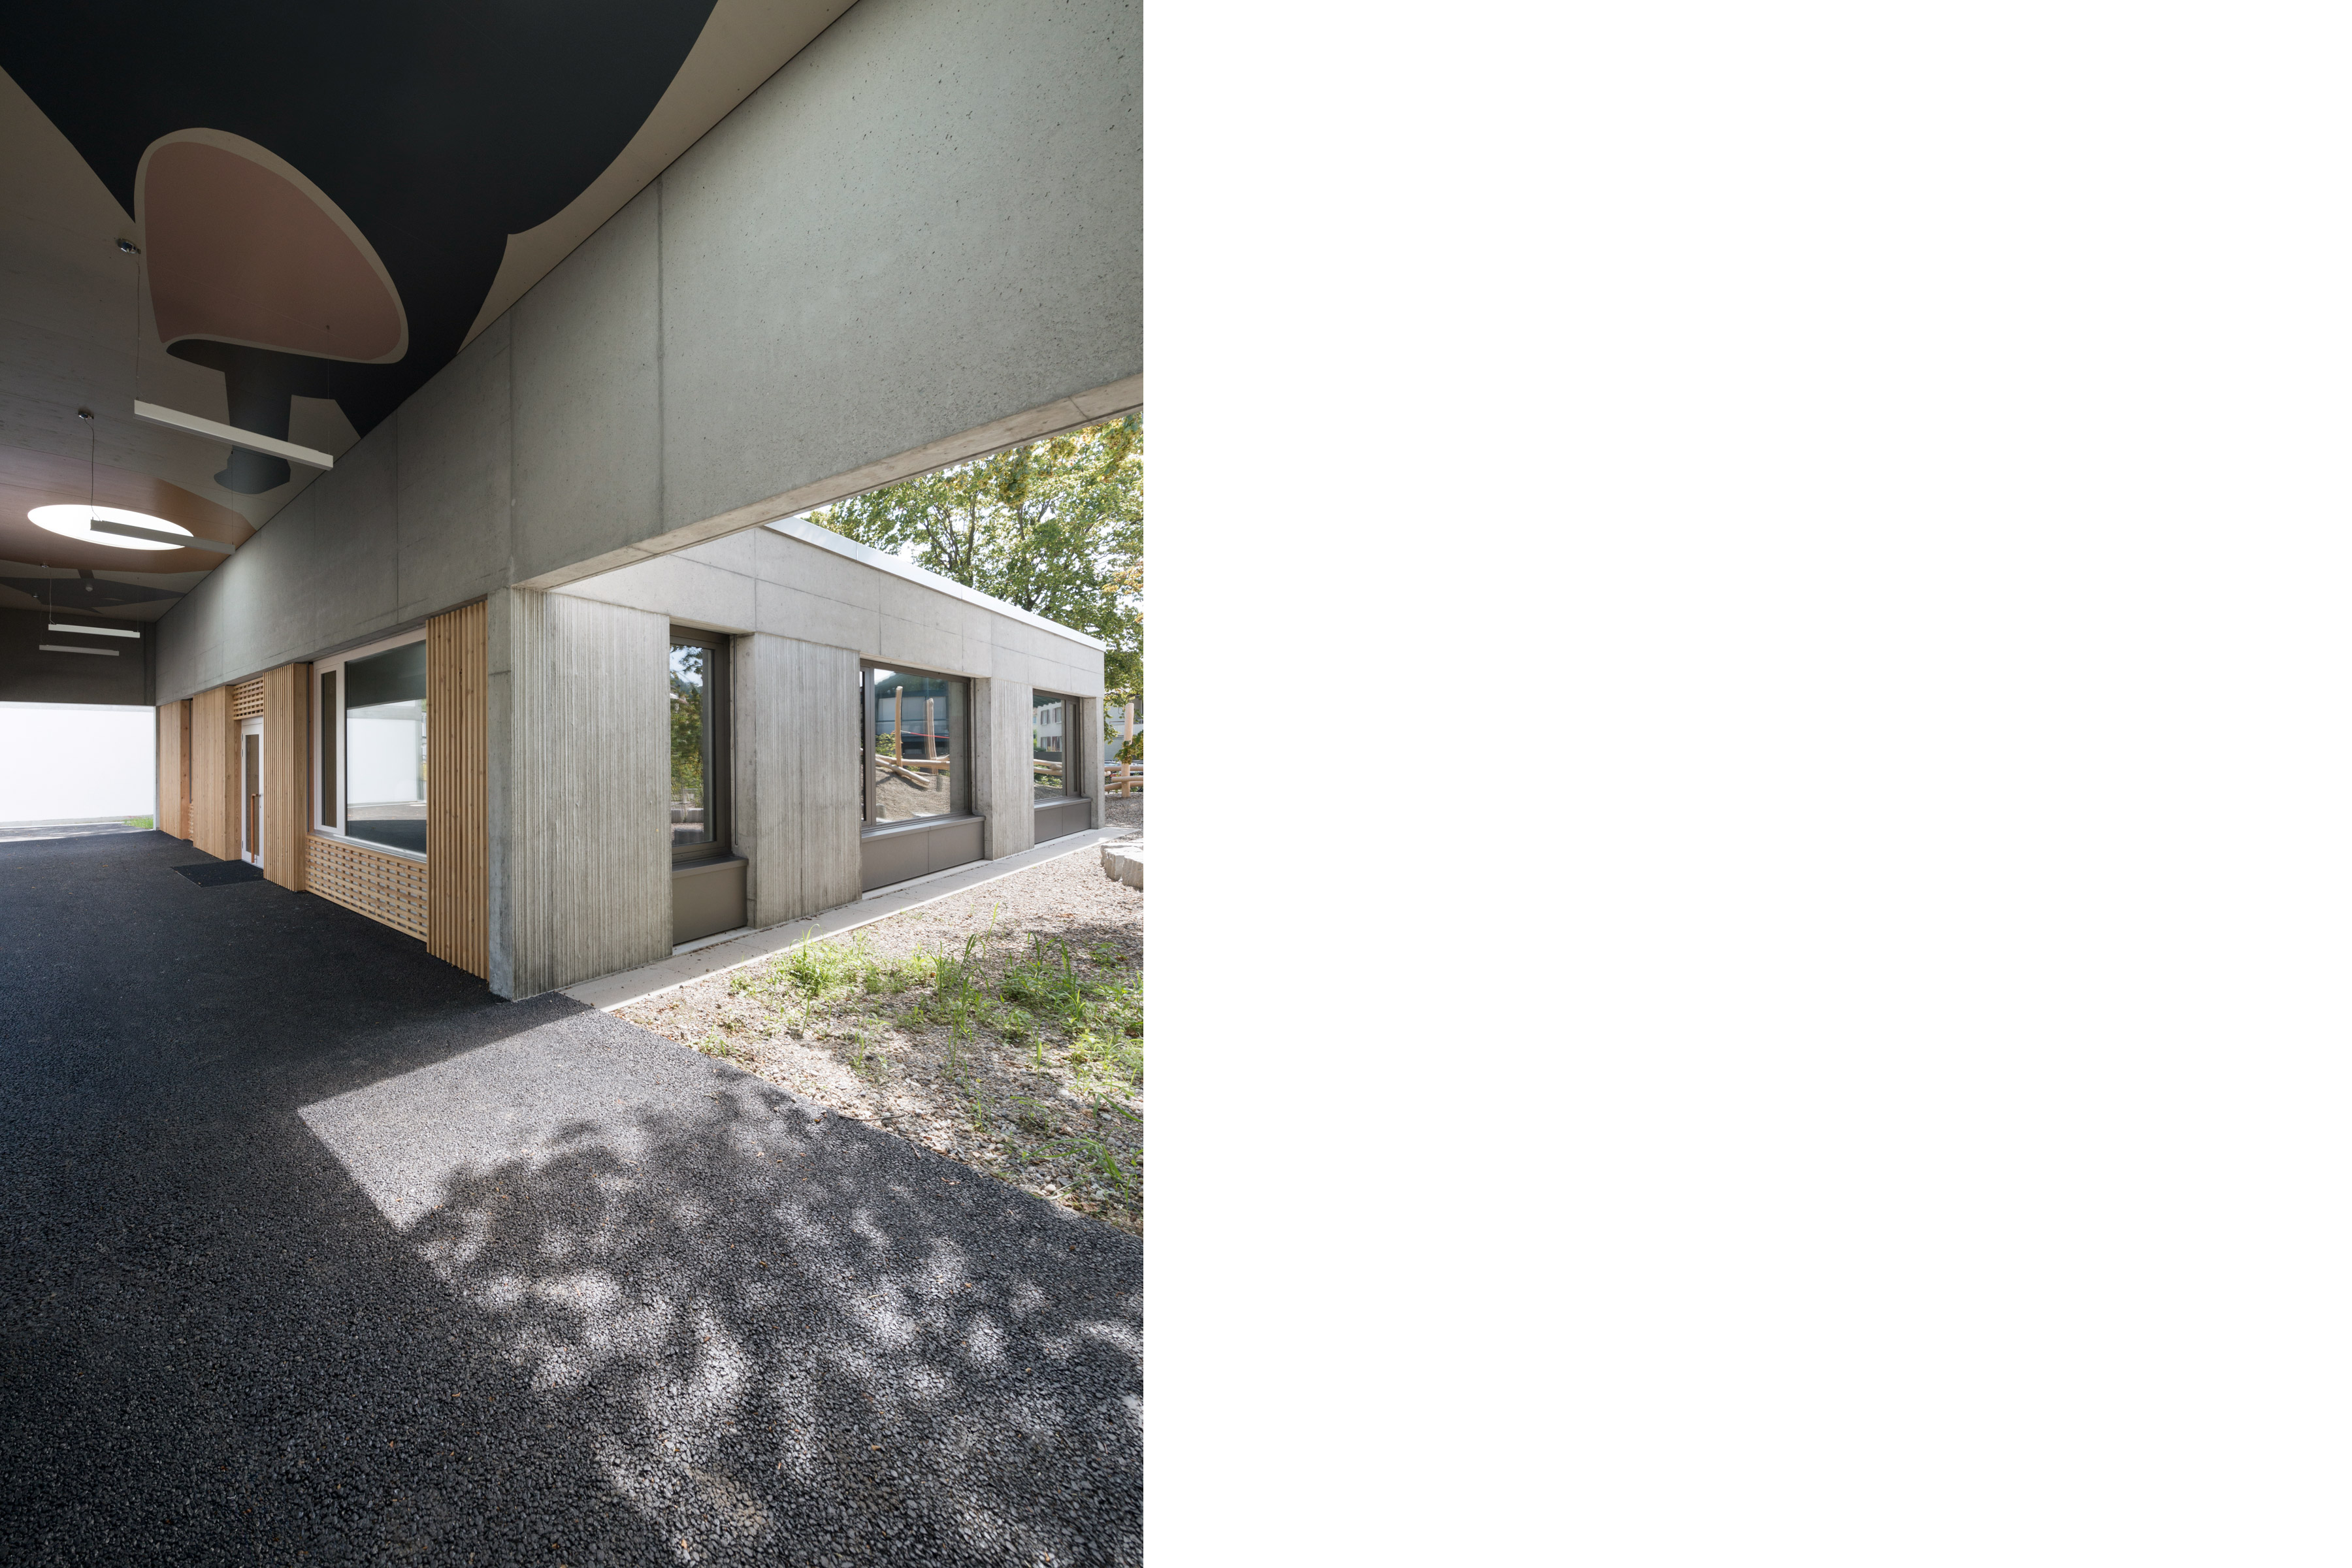 Architecture Photo about Kindergarten Aare Nord Aarau